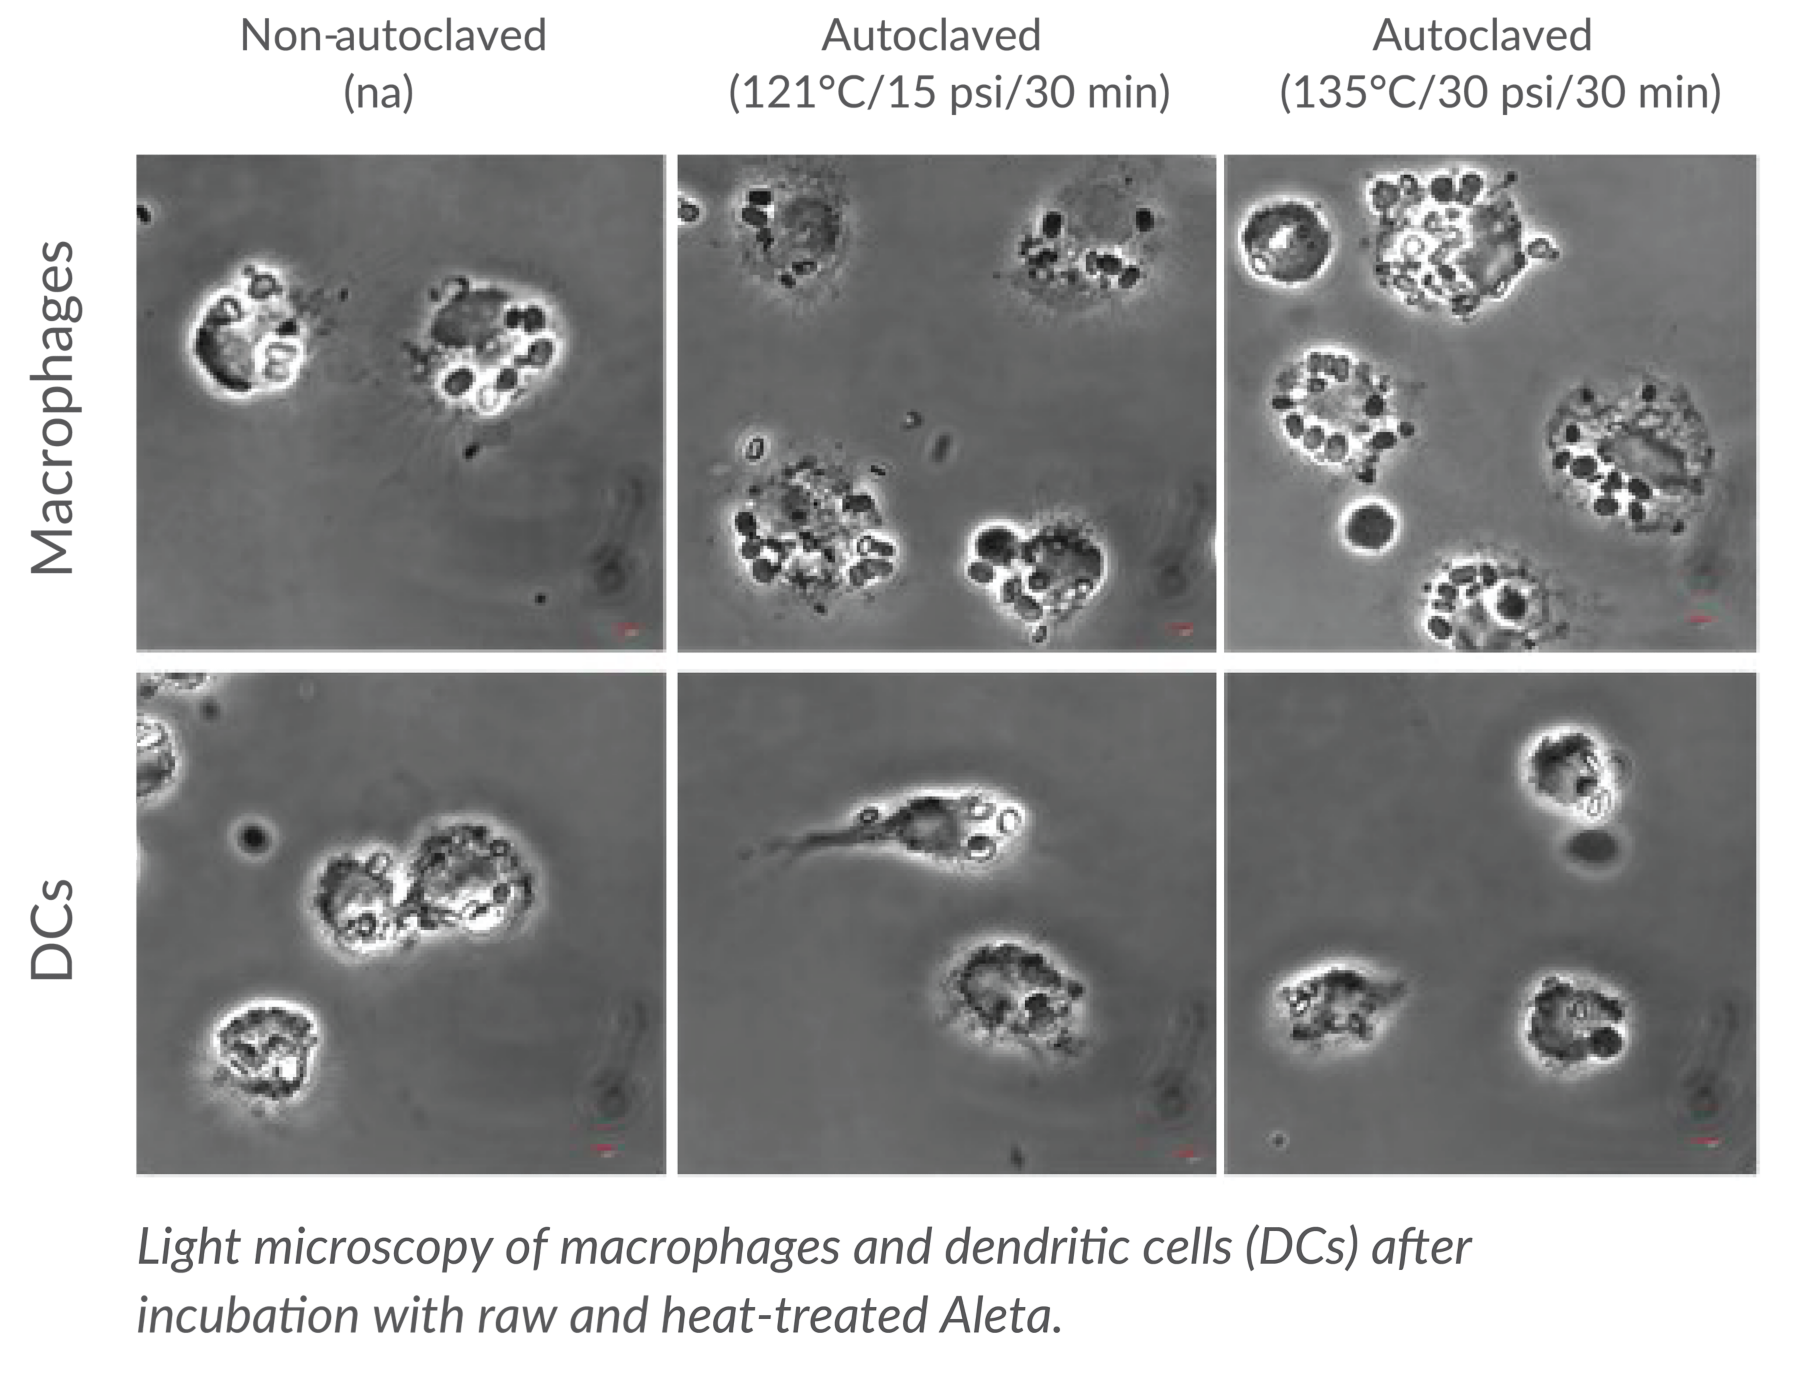 KAA Aleta Light microscopy of macrophages and dendritic cells with Aleta